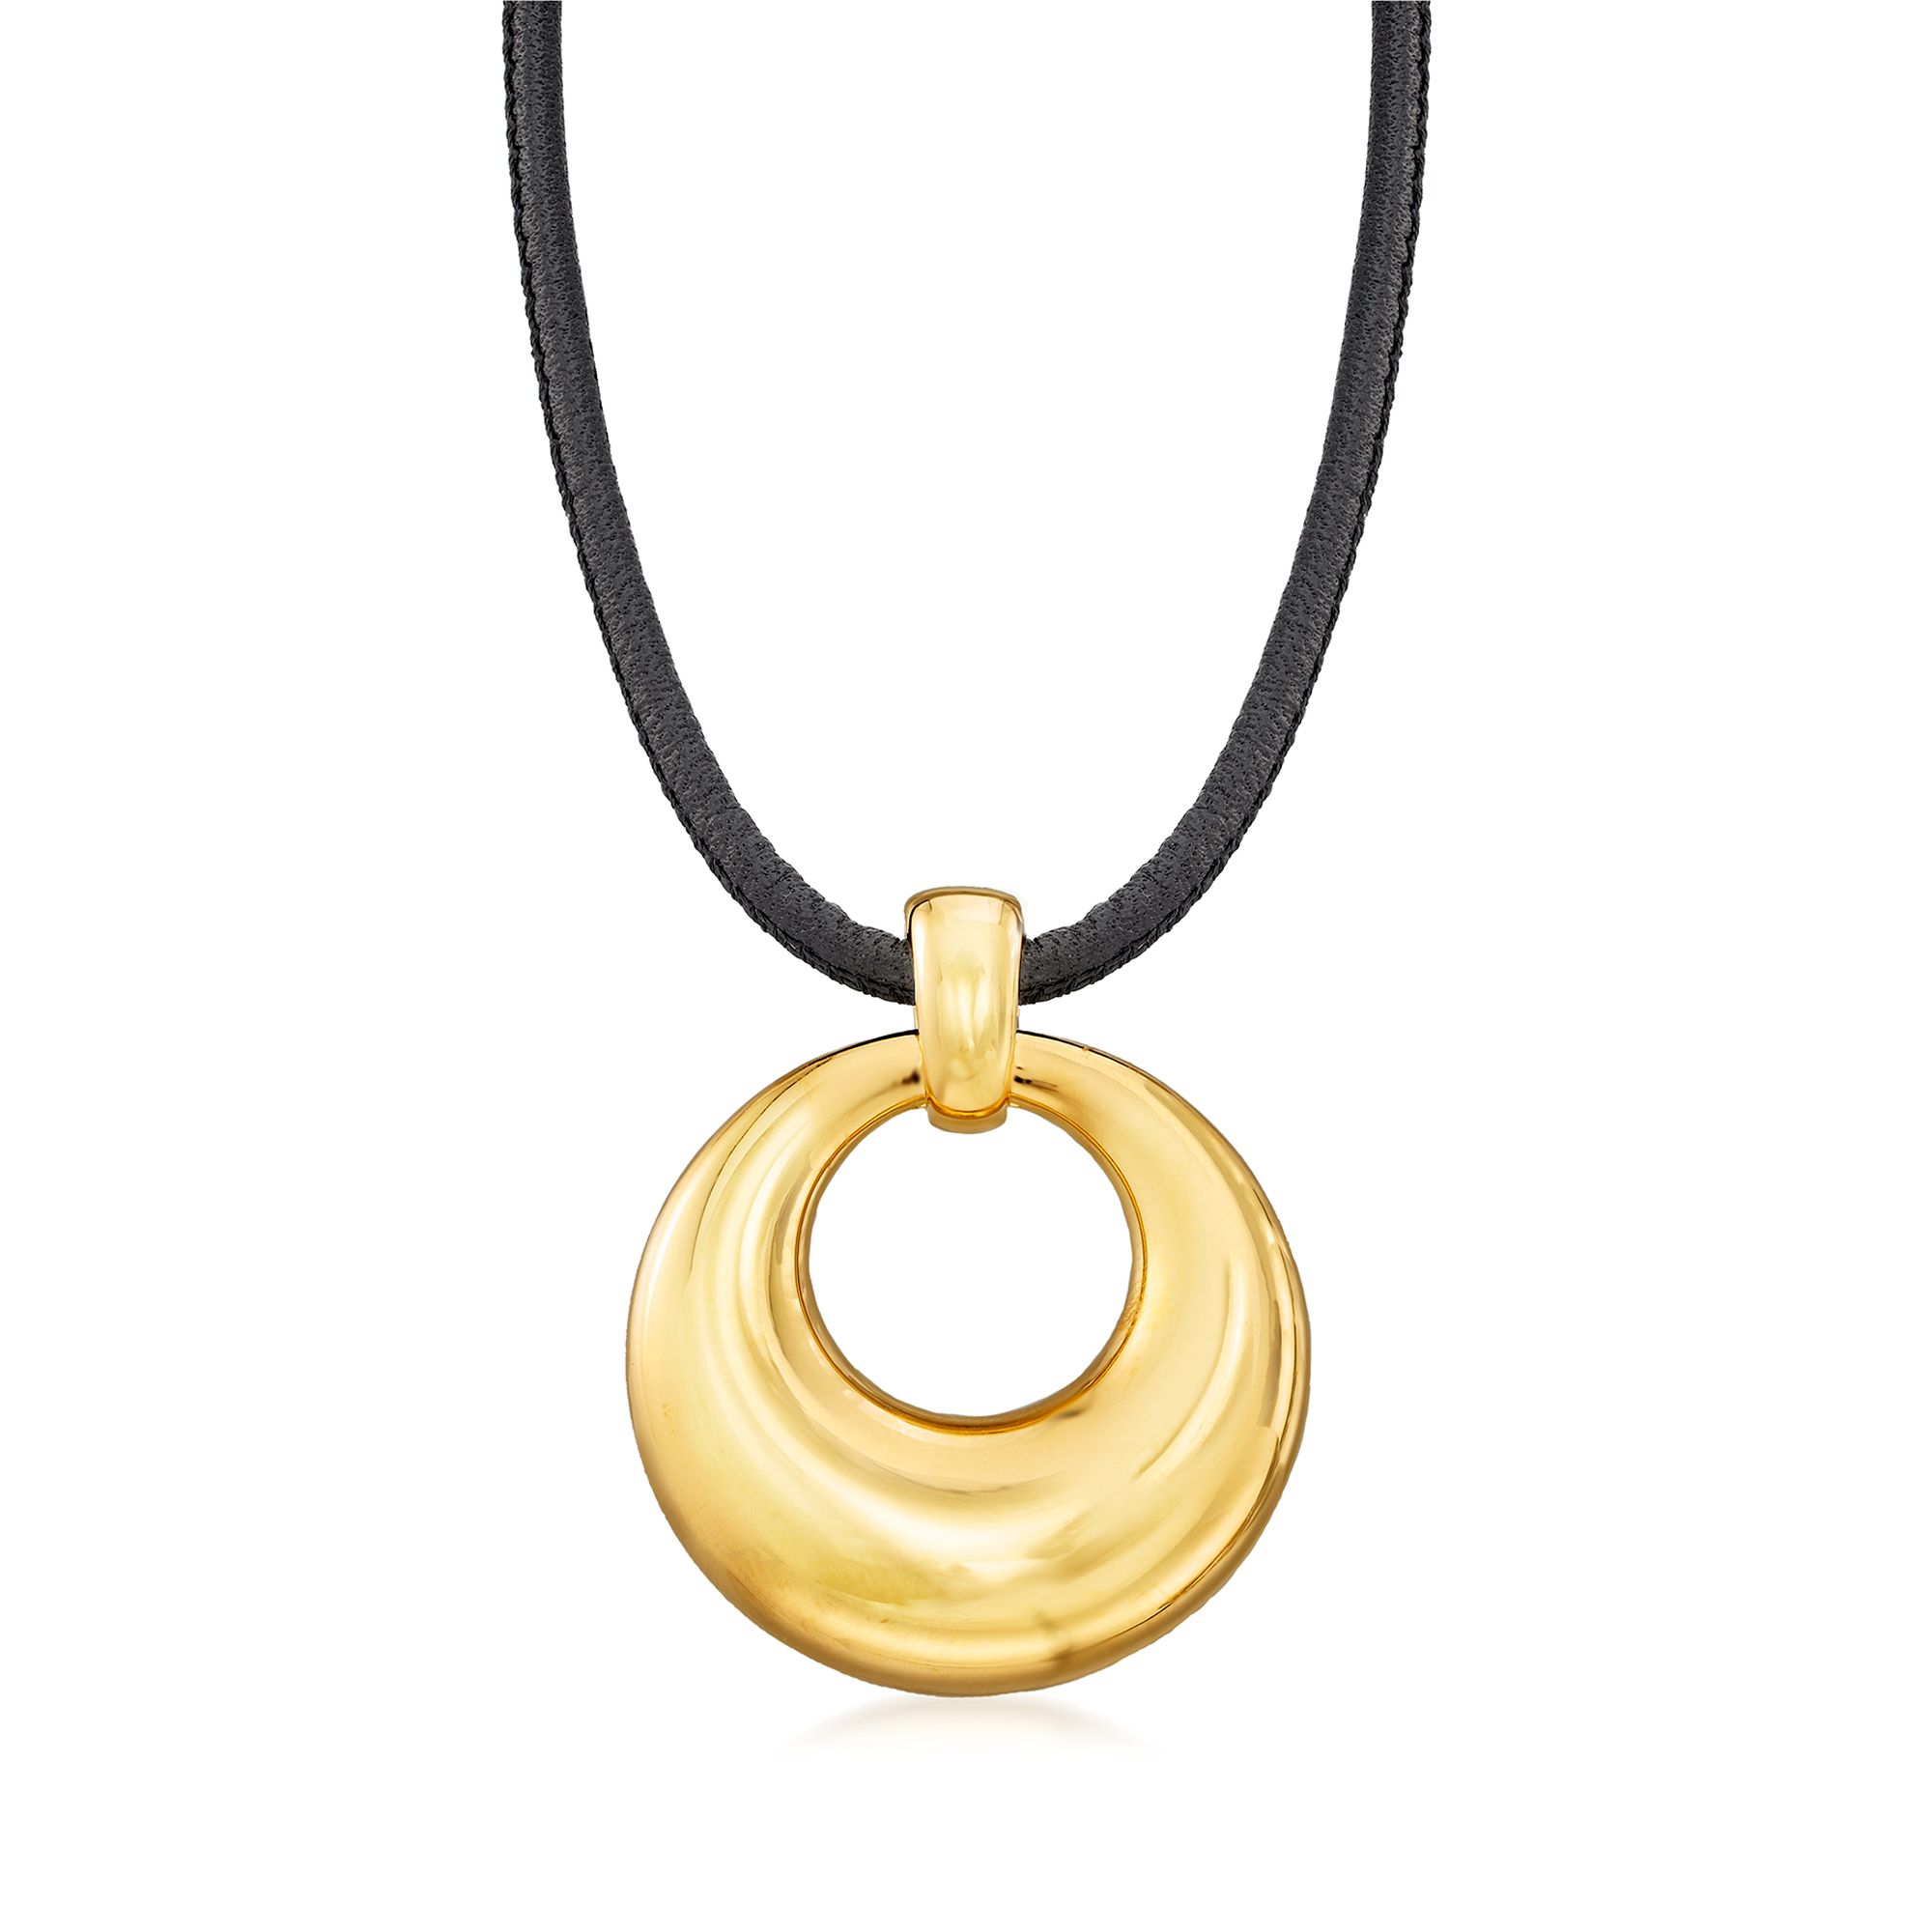 Italian Andiamo 14kt Yellow Gold Over Resin Pendant Necklace with